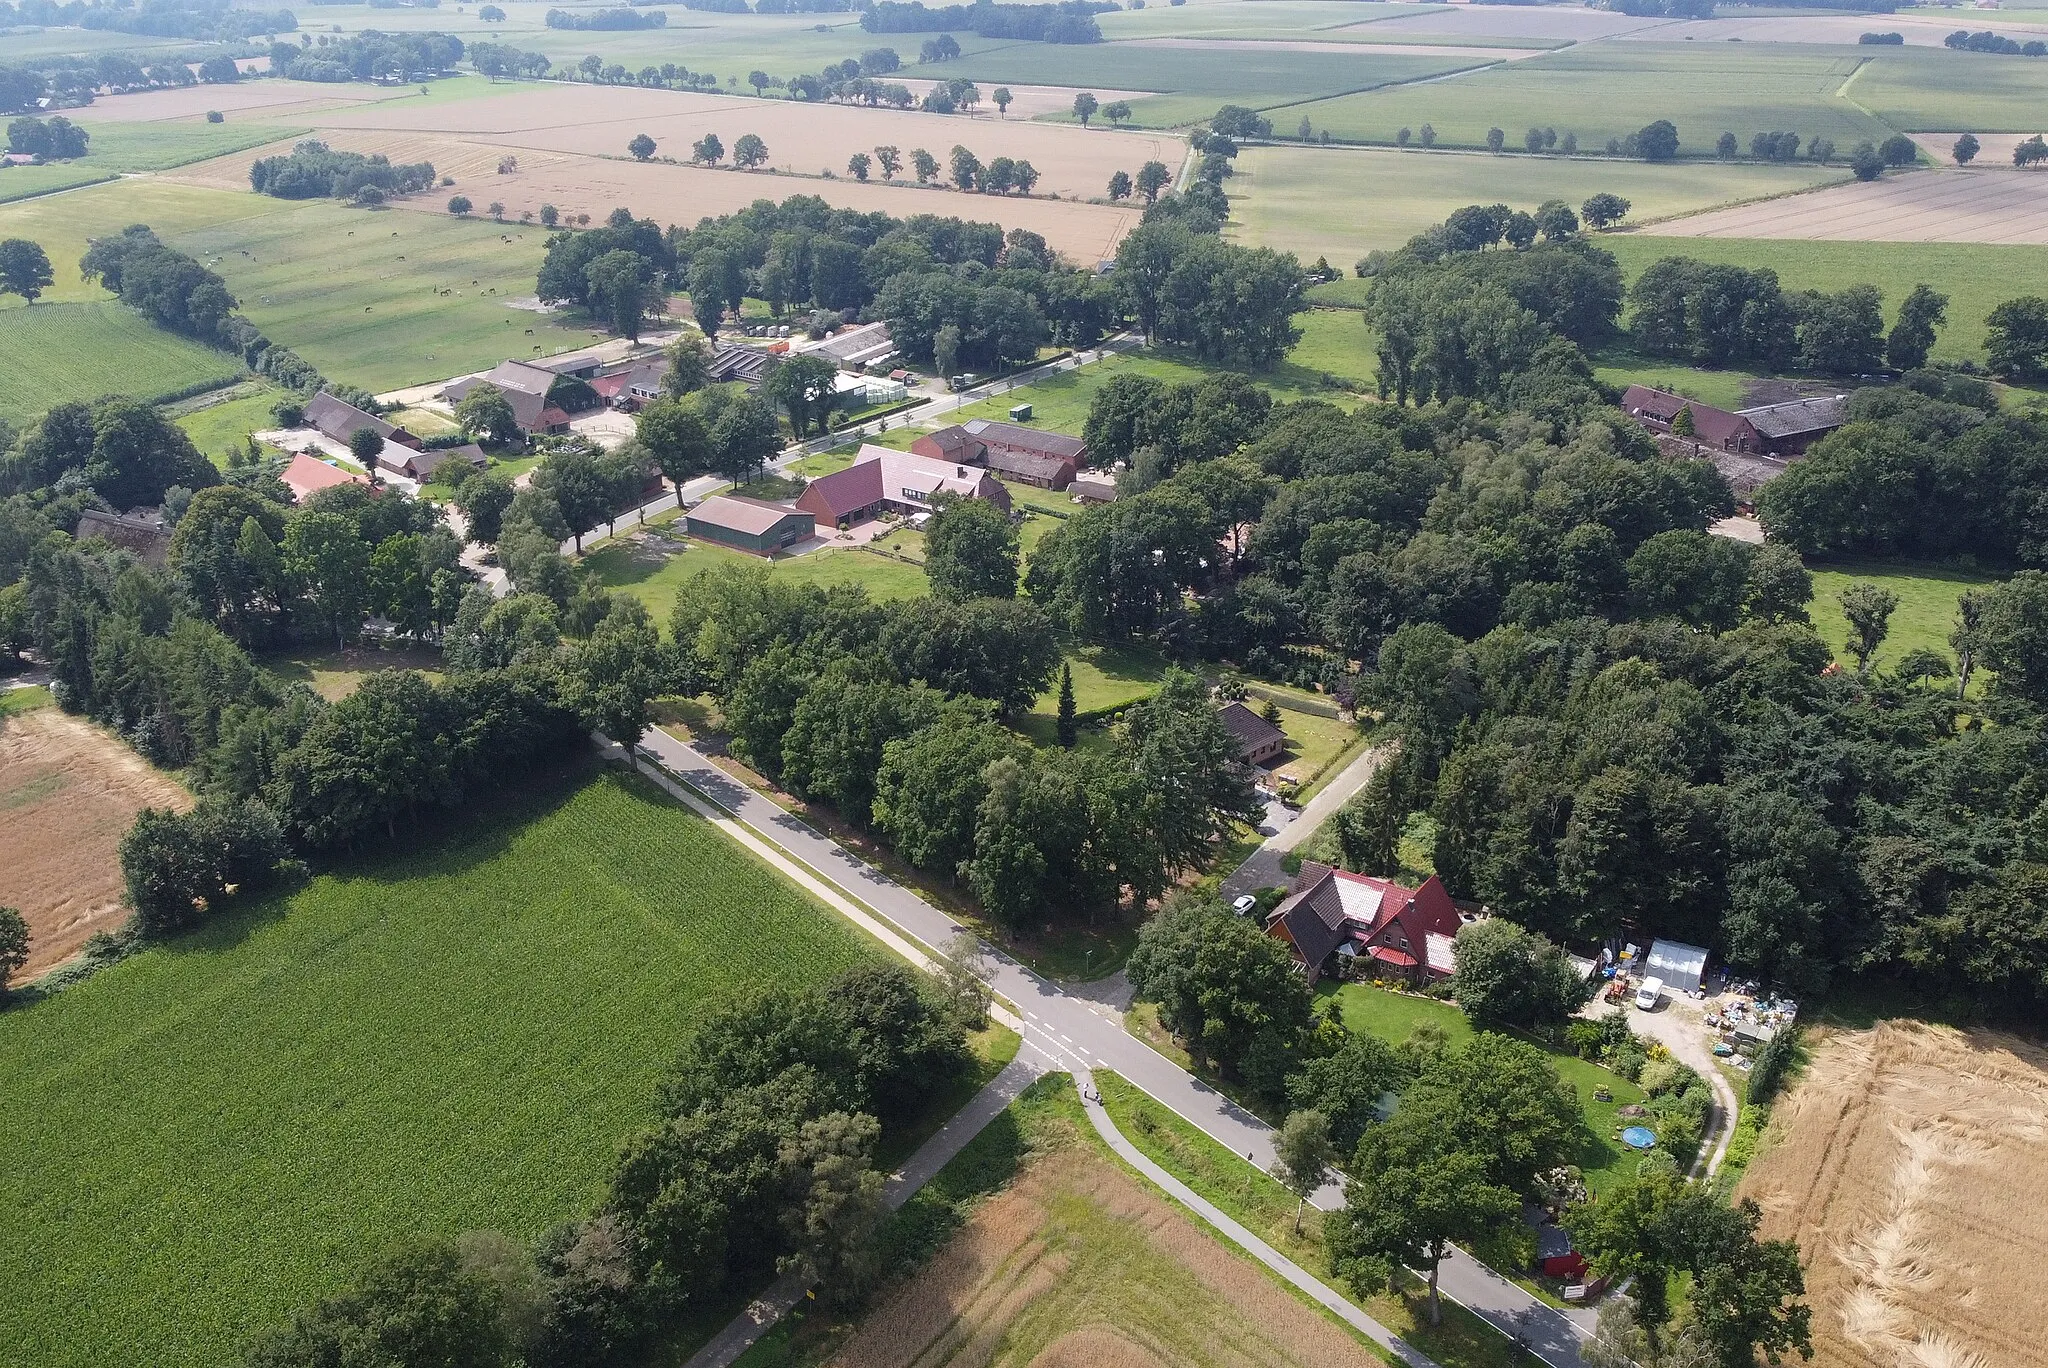 Photo showing: Picture showing Klattenhof, a small community in Lower Saxony. Altitude of the picture is around 95m agl, shot from the north-east.